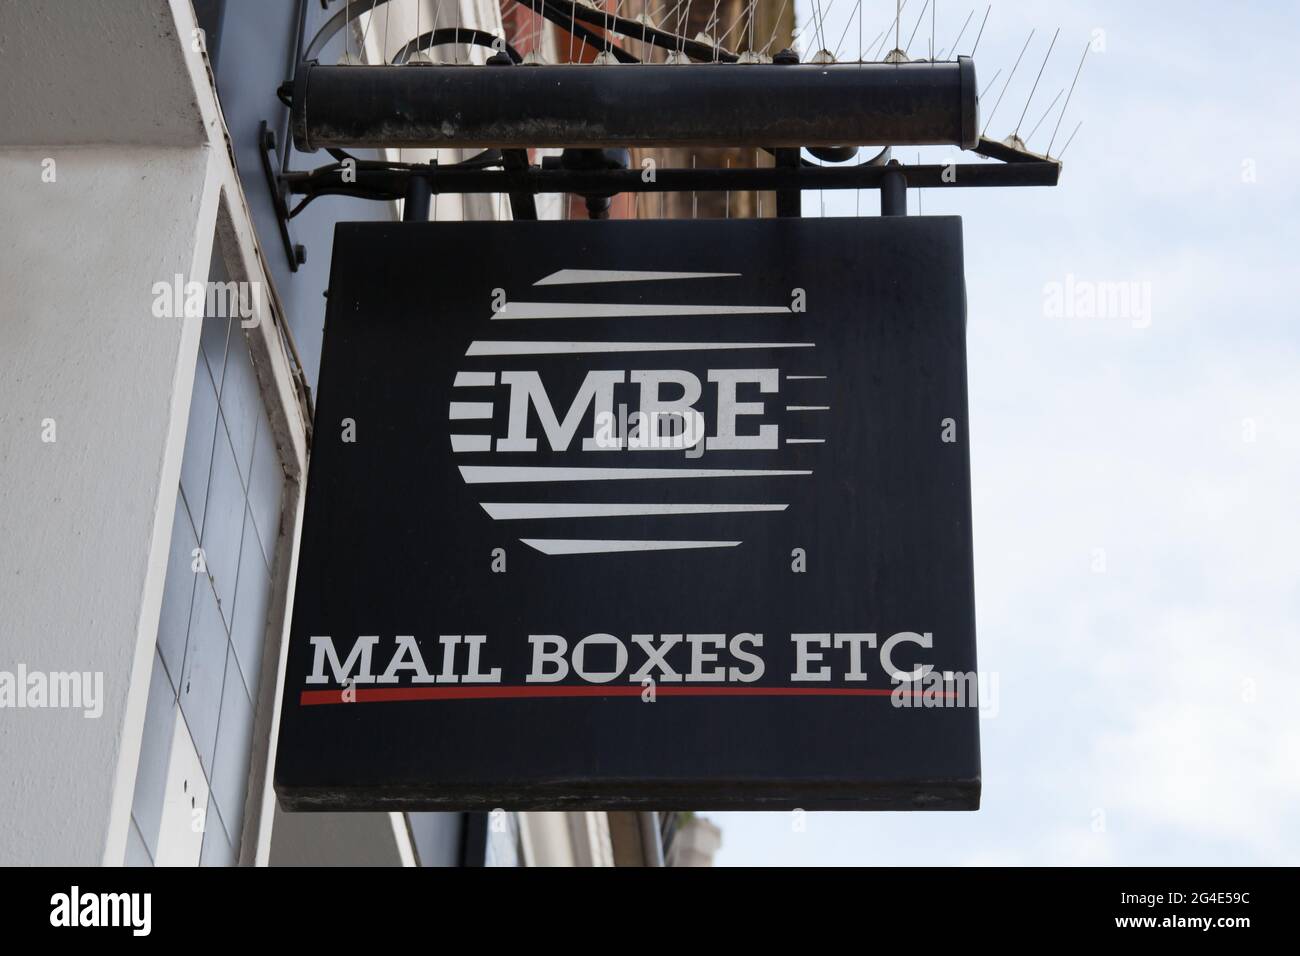 Mail Boxes Etc High Resolution Stock Photography and Images - Alamy